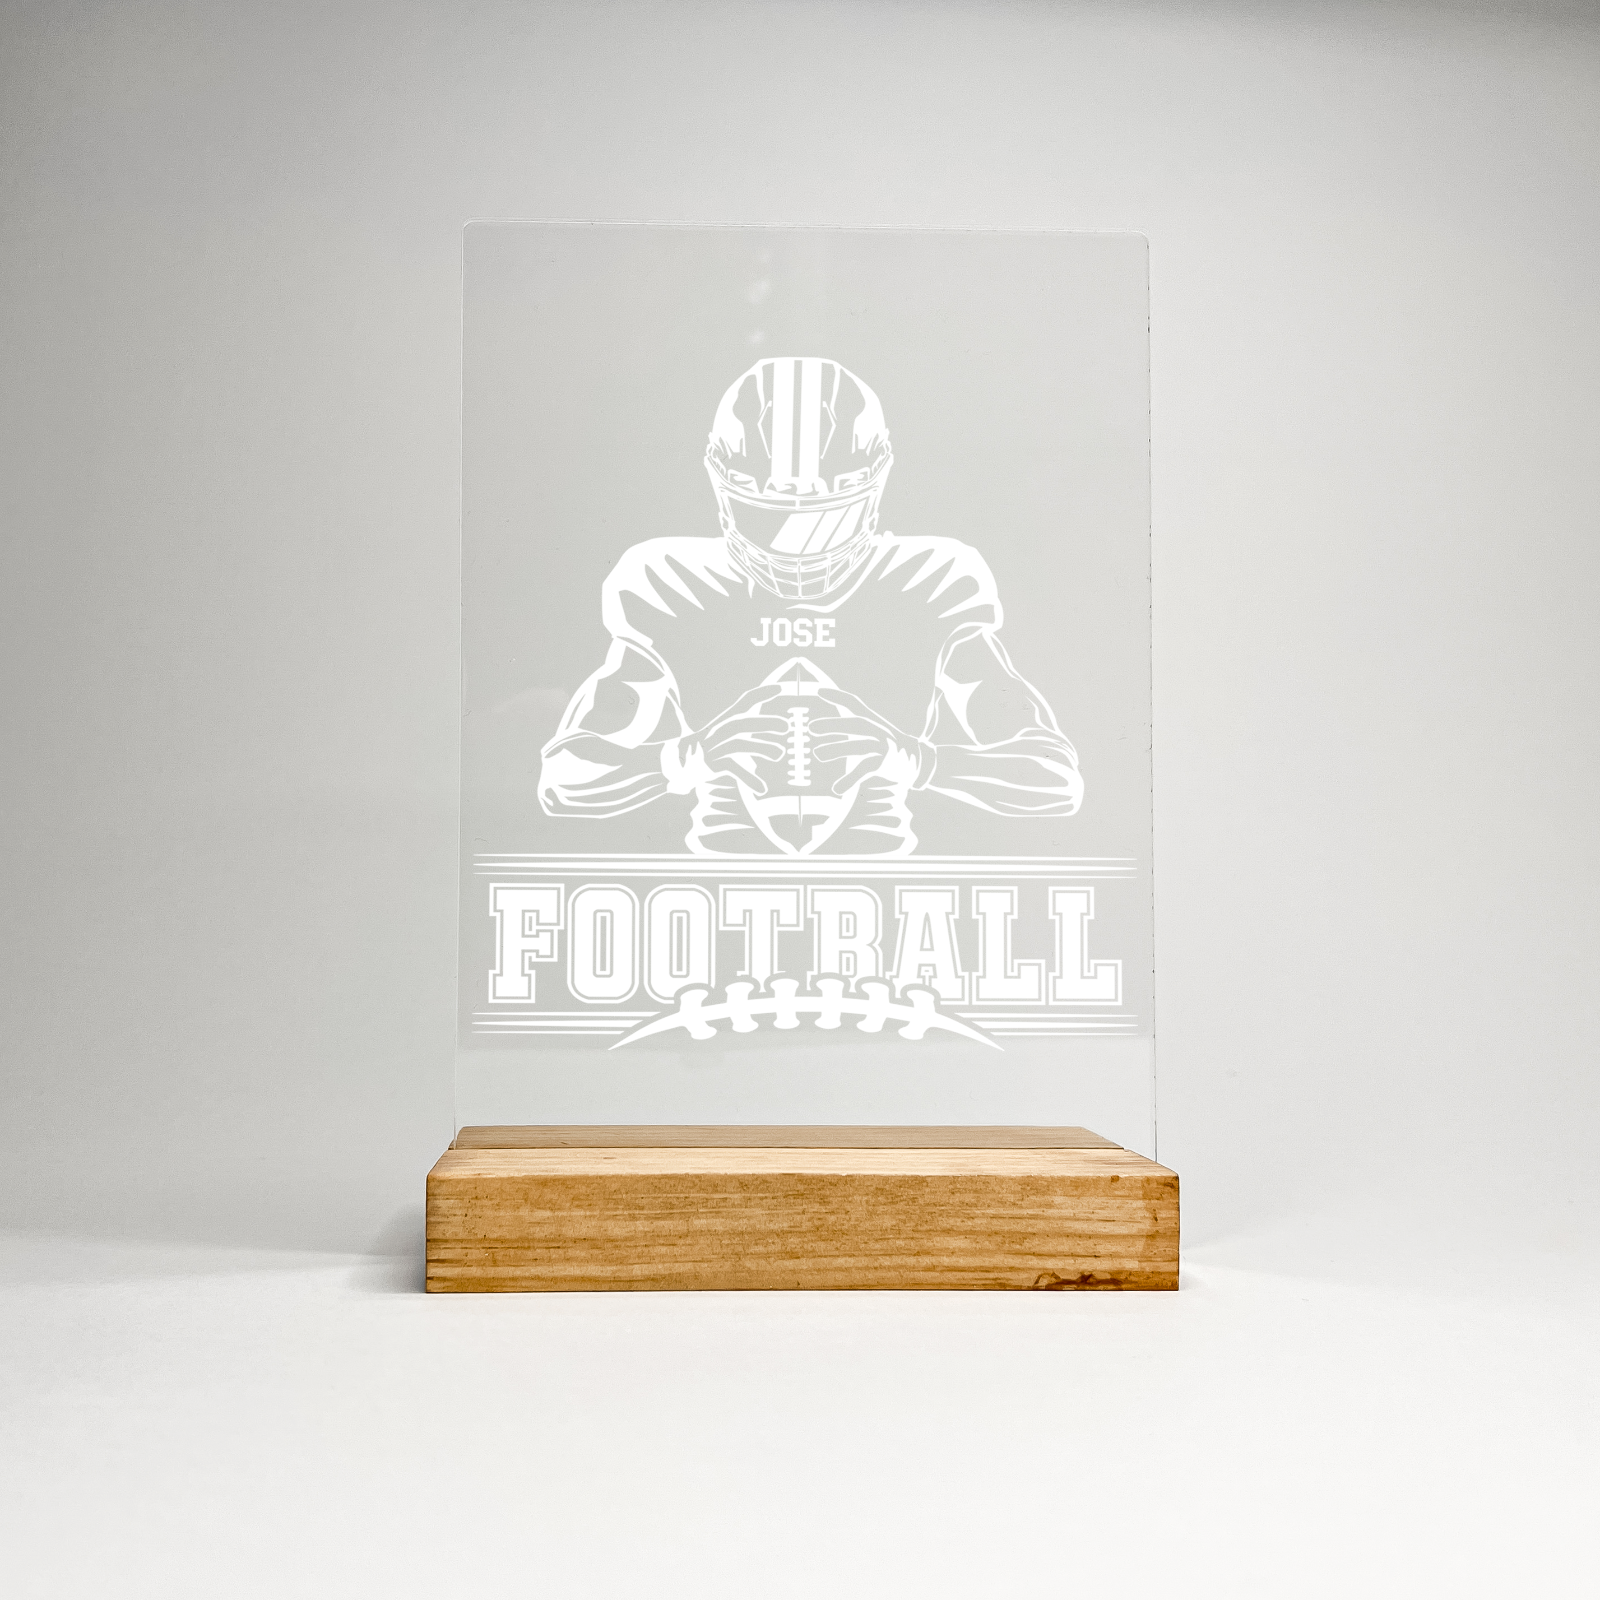 Personalized Engraved Custom Desk Wooden Stand Football Athlete Warner Gift